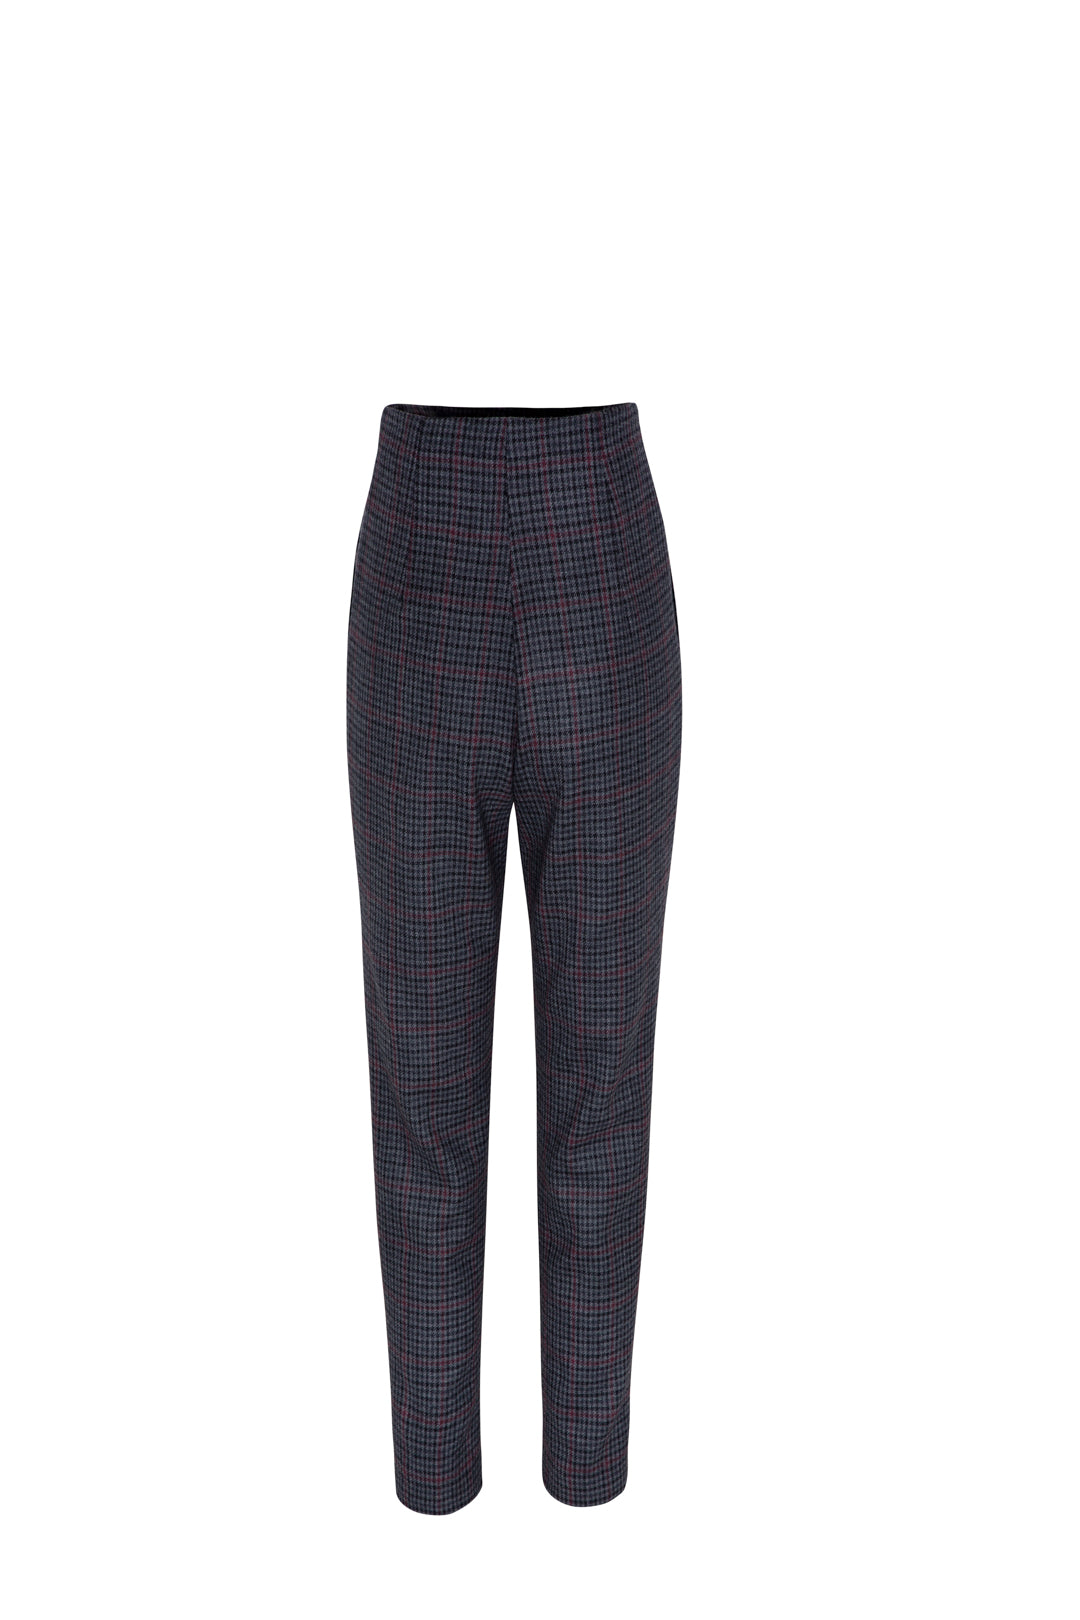 GRAY AND LARGE CHECK STOCKHOLM TROUSERS